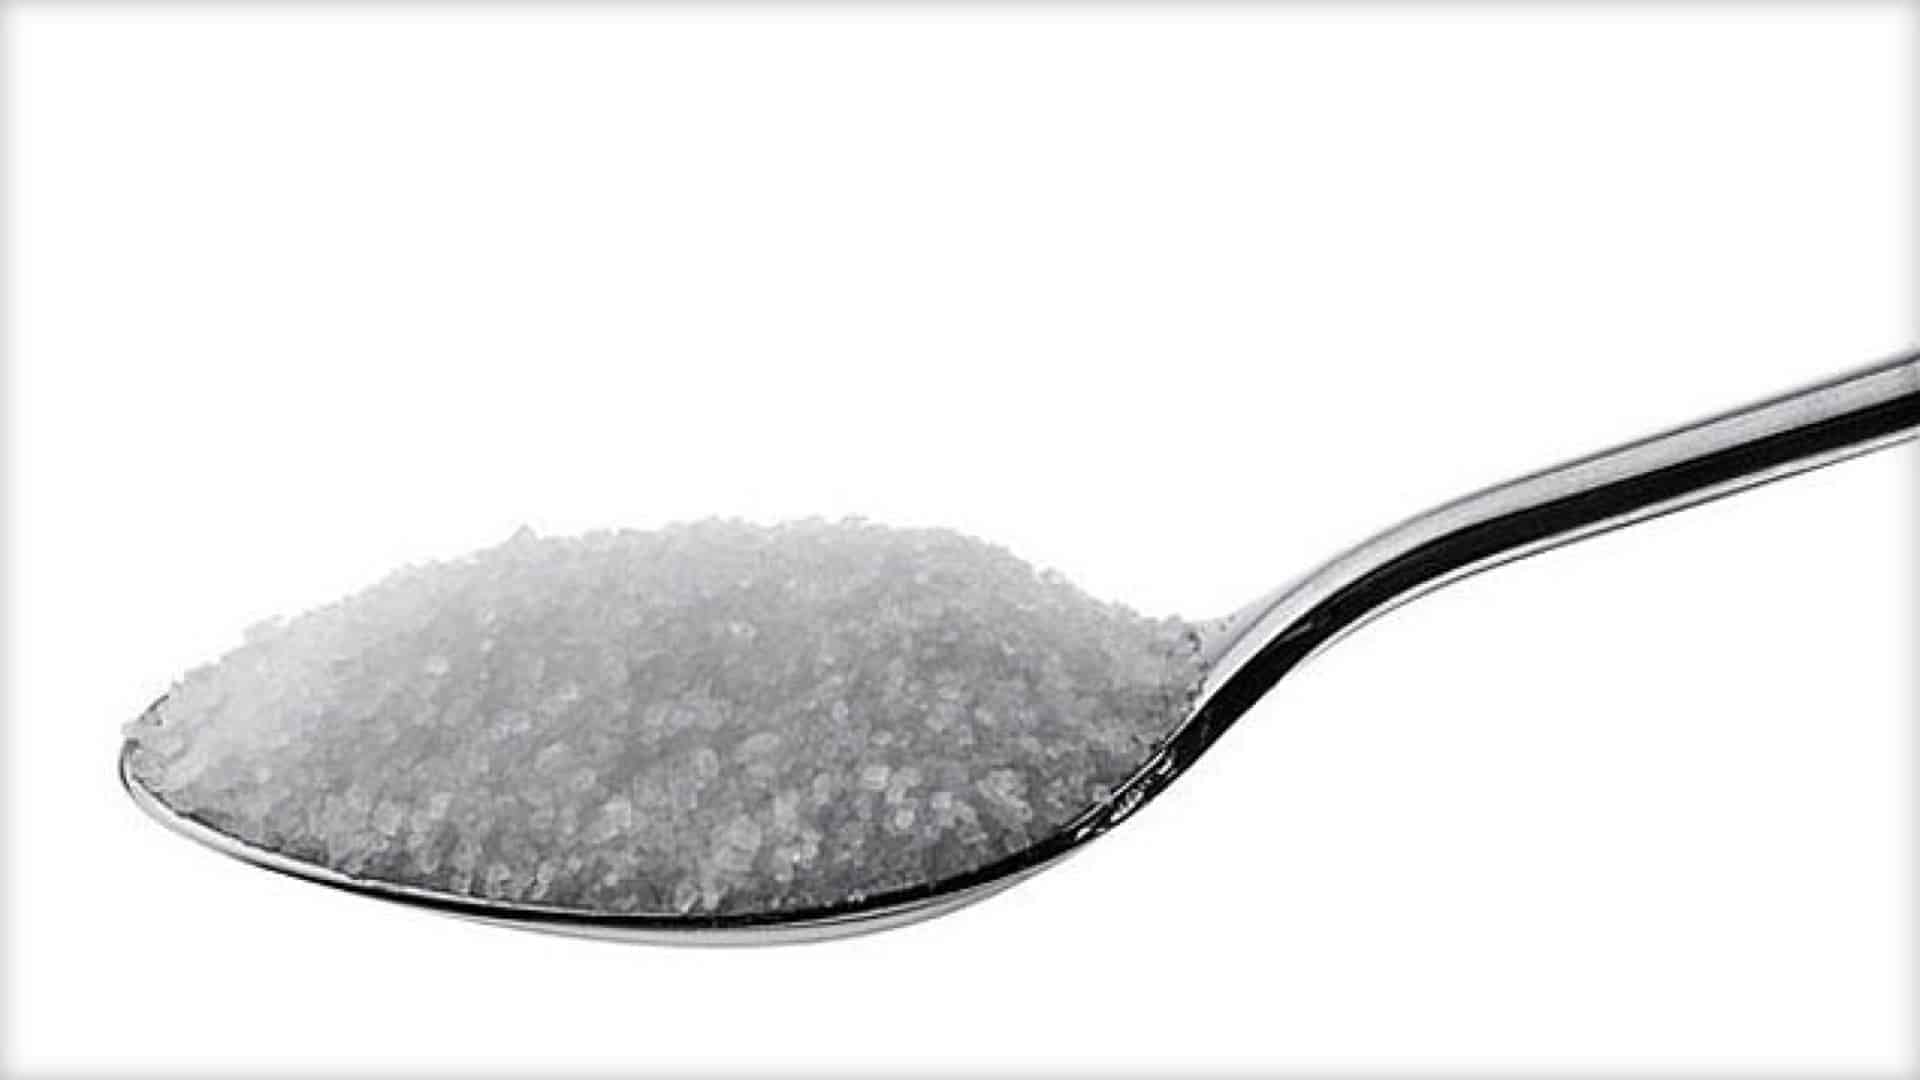 A spoon is shown in close-up, loaded with white sugar granuals.